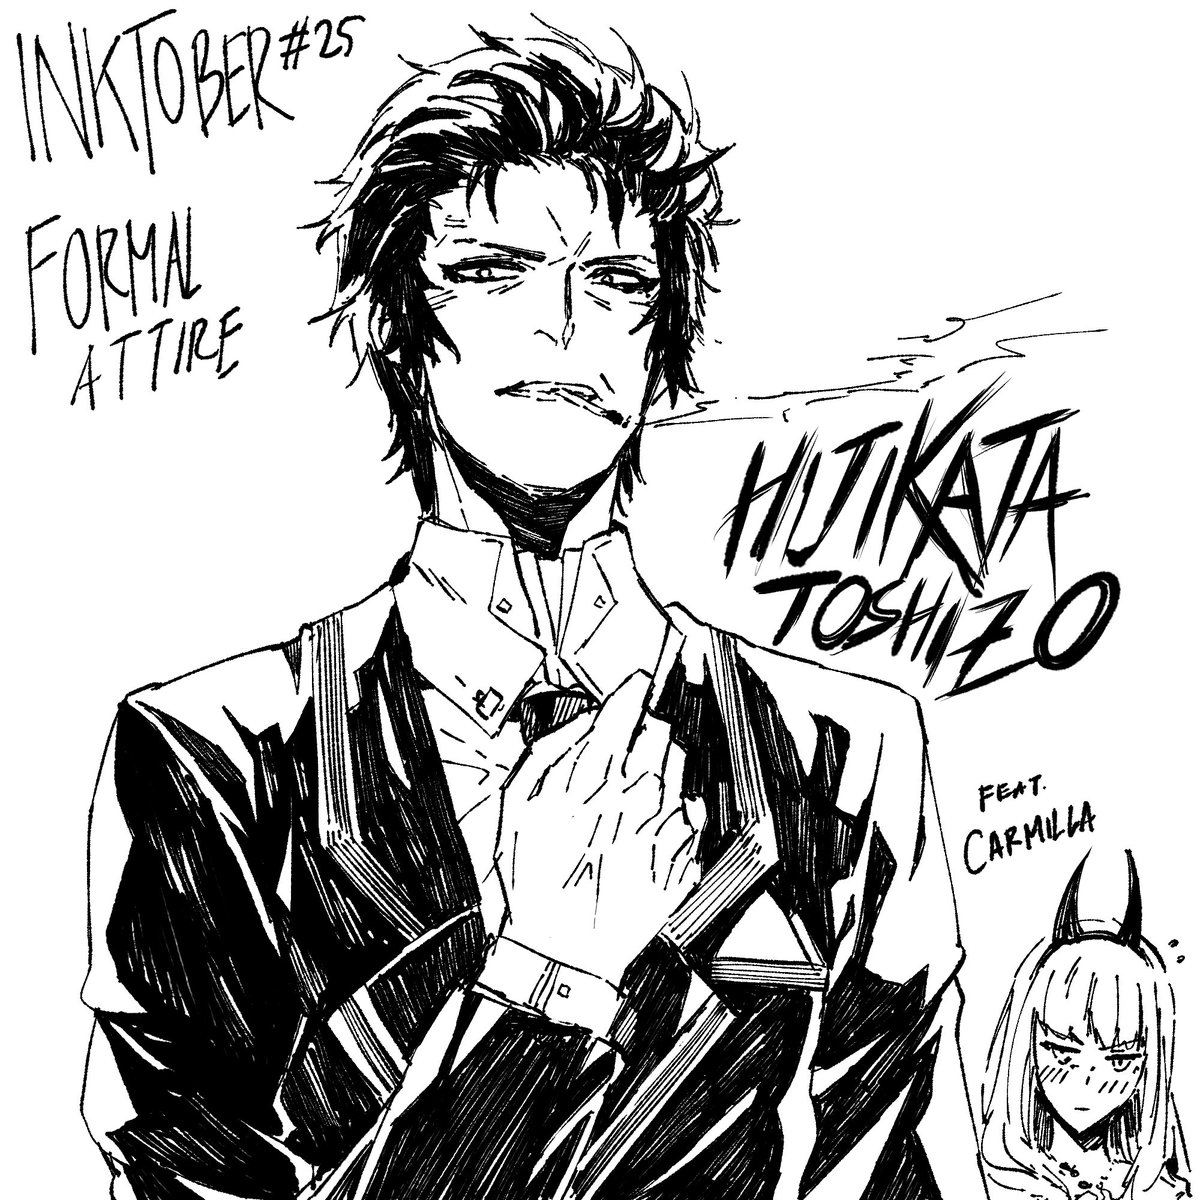 hello! sorry for not updating these 2 days. I go to Greece and Austria for a week, so expect my slow progress :(( anyway, here's my take for 25th theme: formal attire, featuring our berserker commander! #FGO #inktober #fgoecartist 